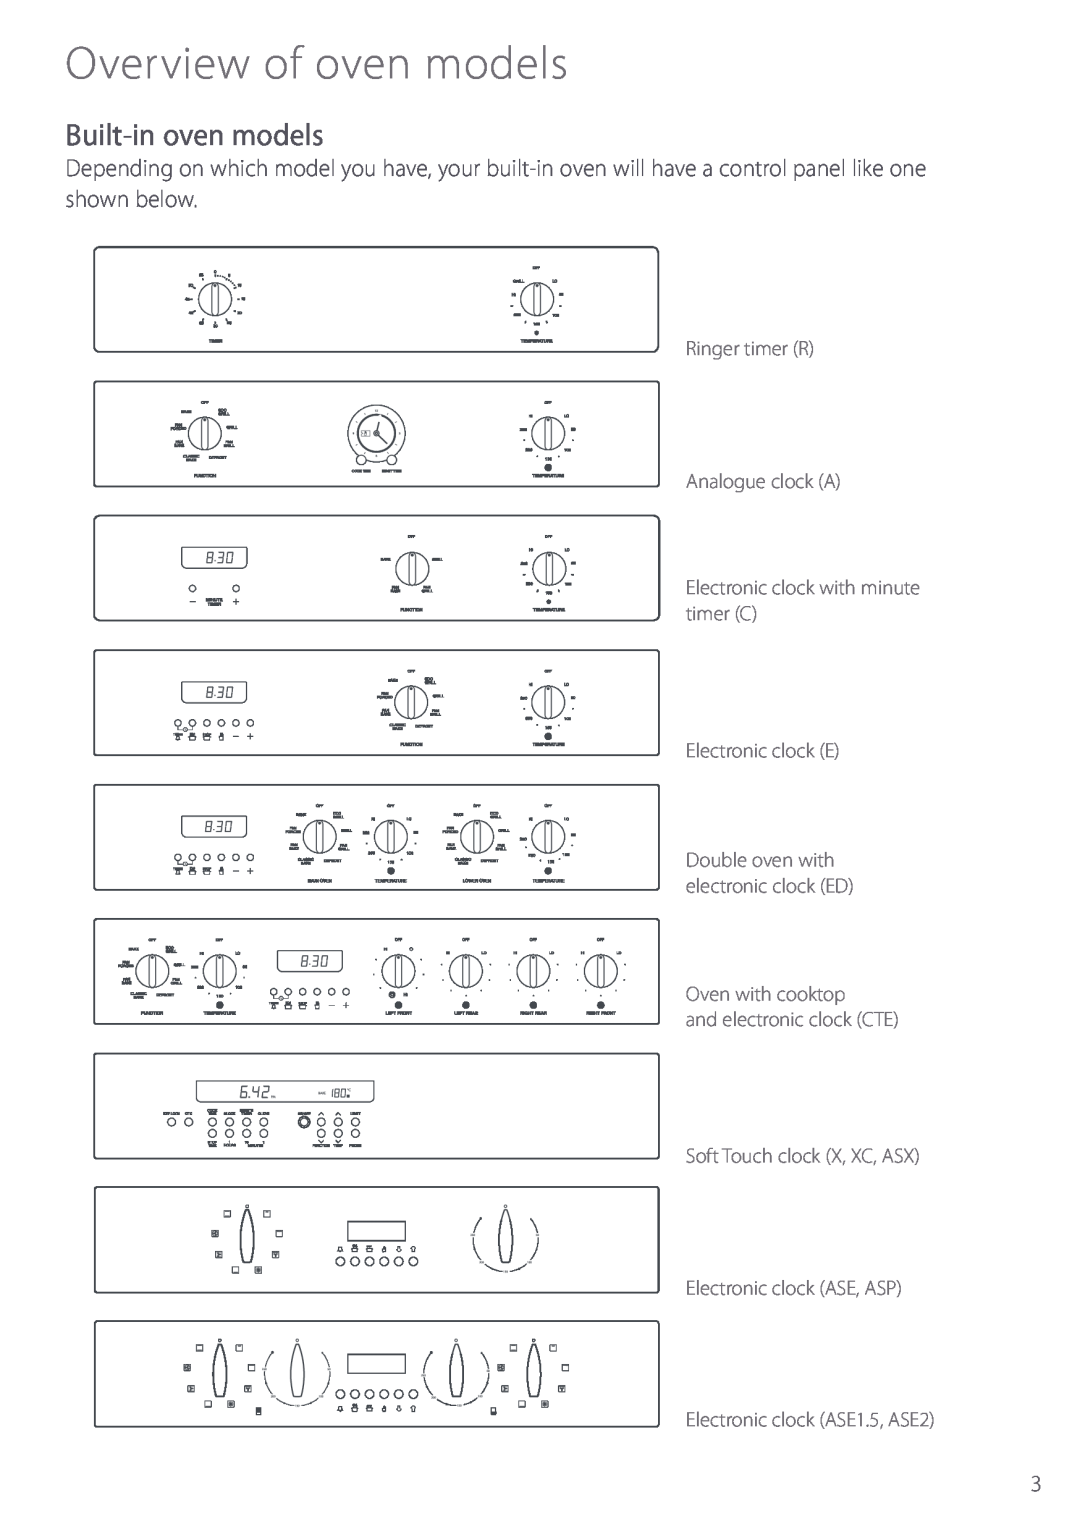 Fisher & Paykel BI452 manual Overview of oven models, Built-in oven models, Double oven with electronic clock ED 